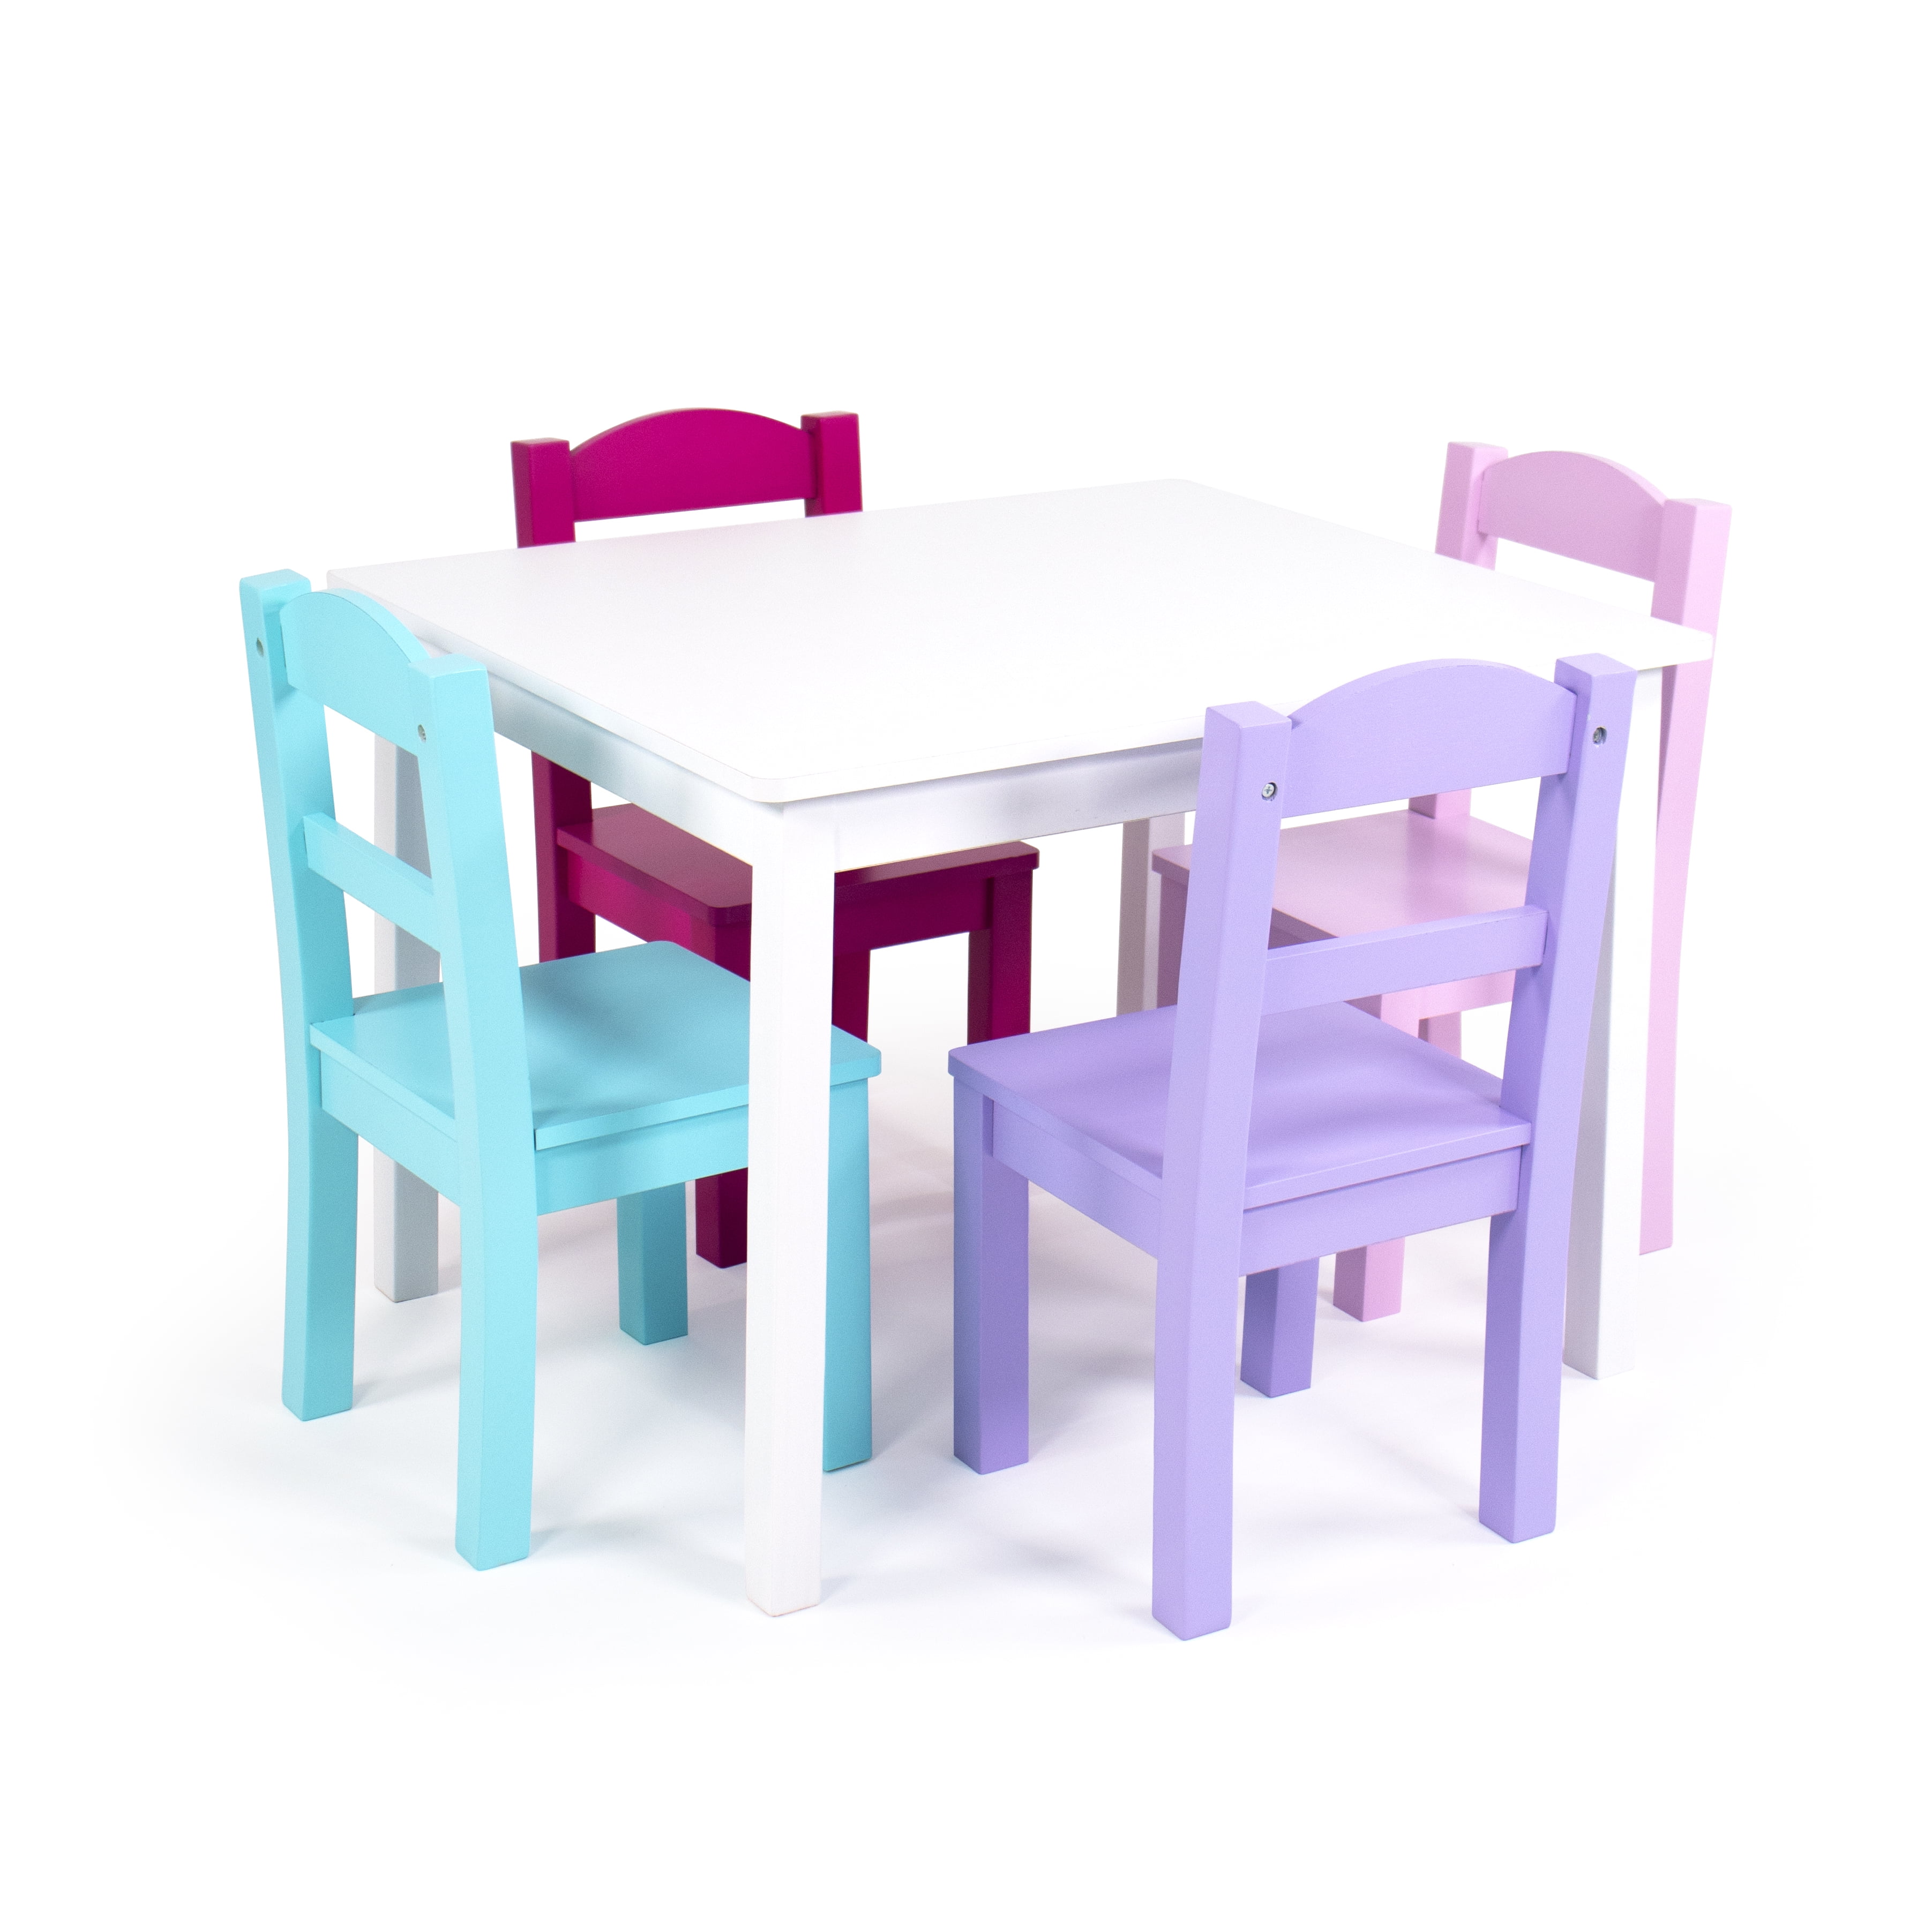 5-Piece Table And Chair Set Furniture Kids Wood Multi-Colored Playroom Classroom 